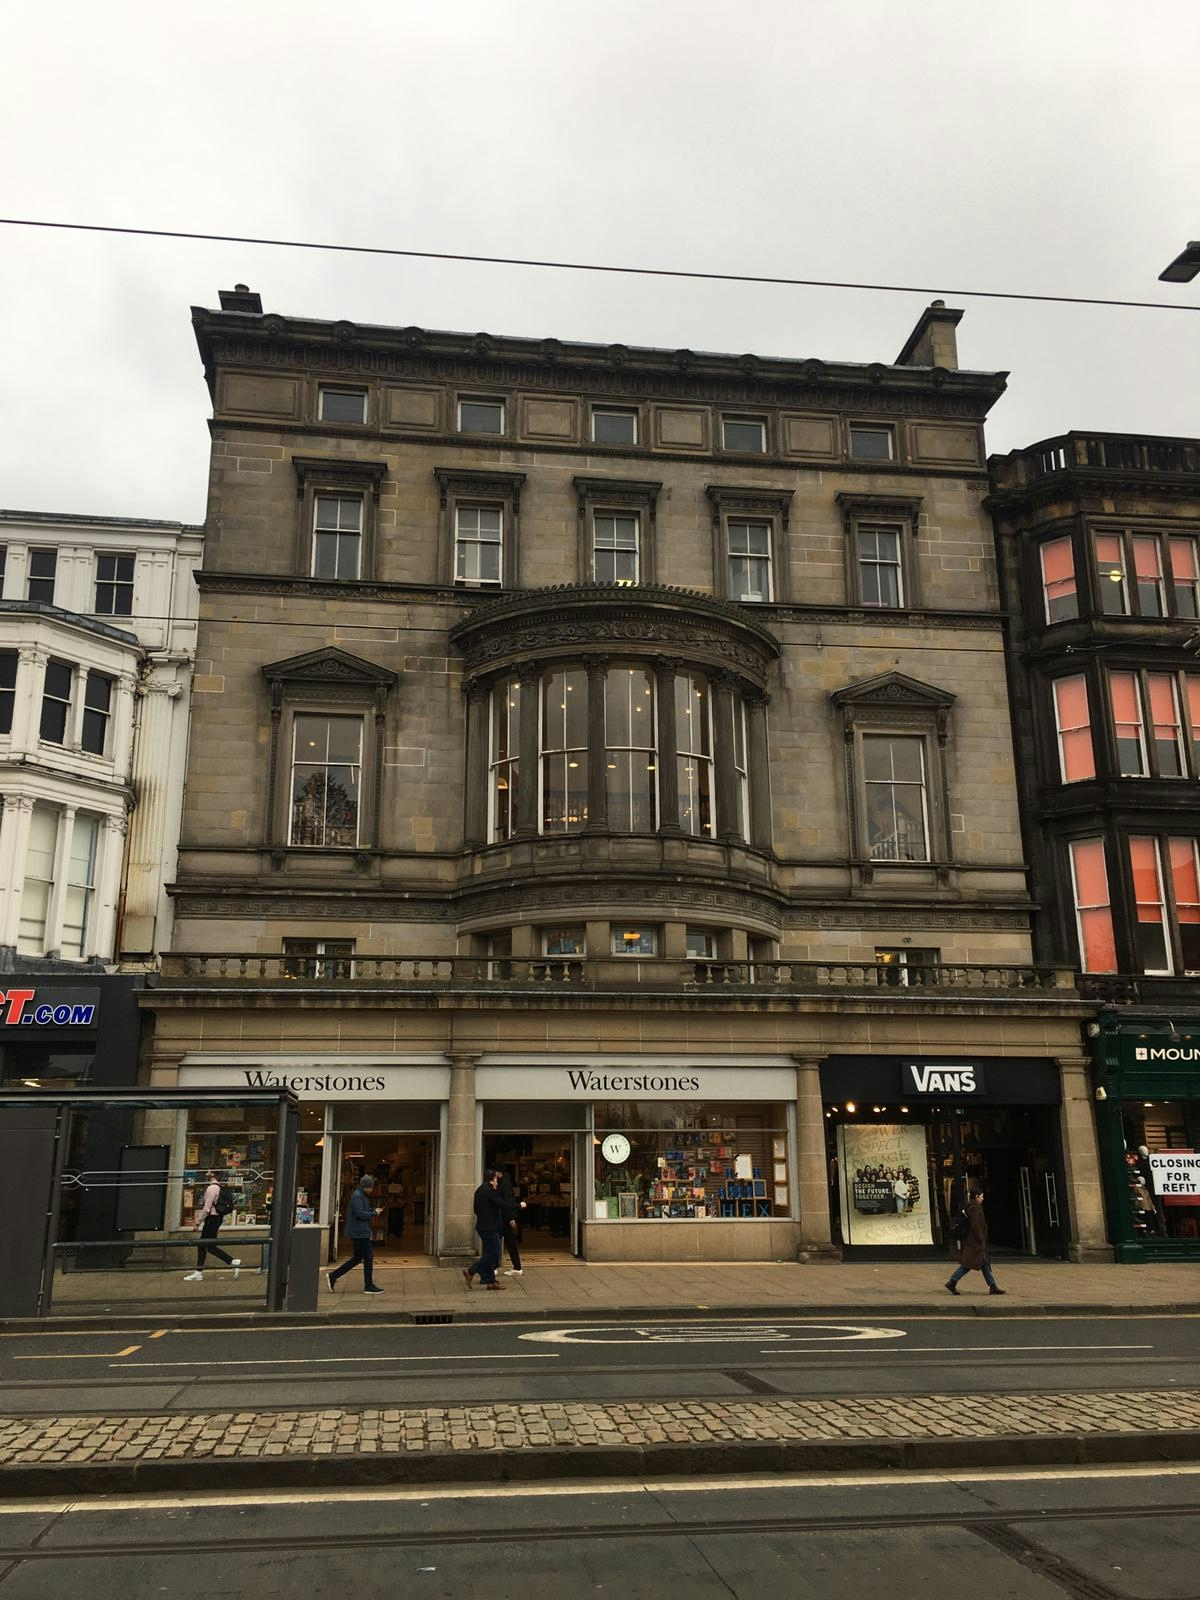 Colour photograph of the site of the Fire Island nightclub in Edinburgh. It is a stone building with a prominent round central window on the first floor. Below are now a Waterstones store and a Vans store. 